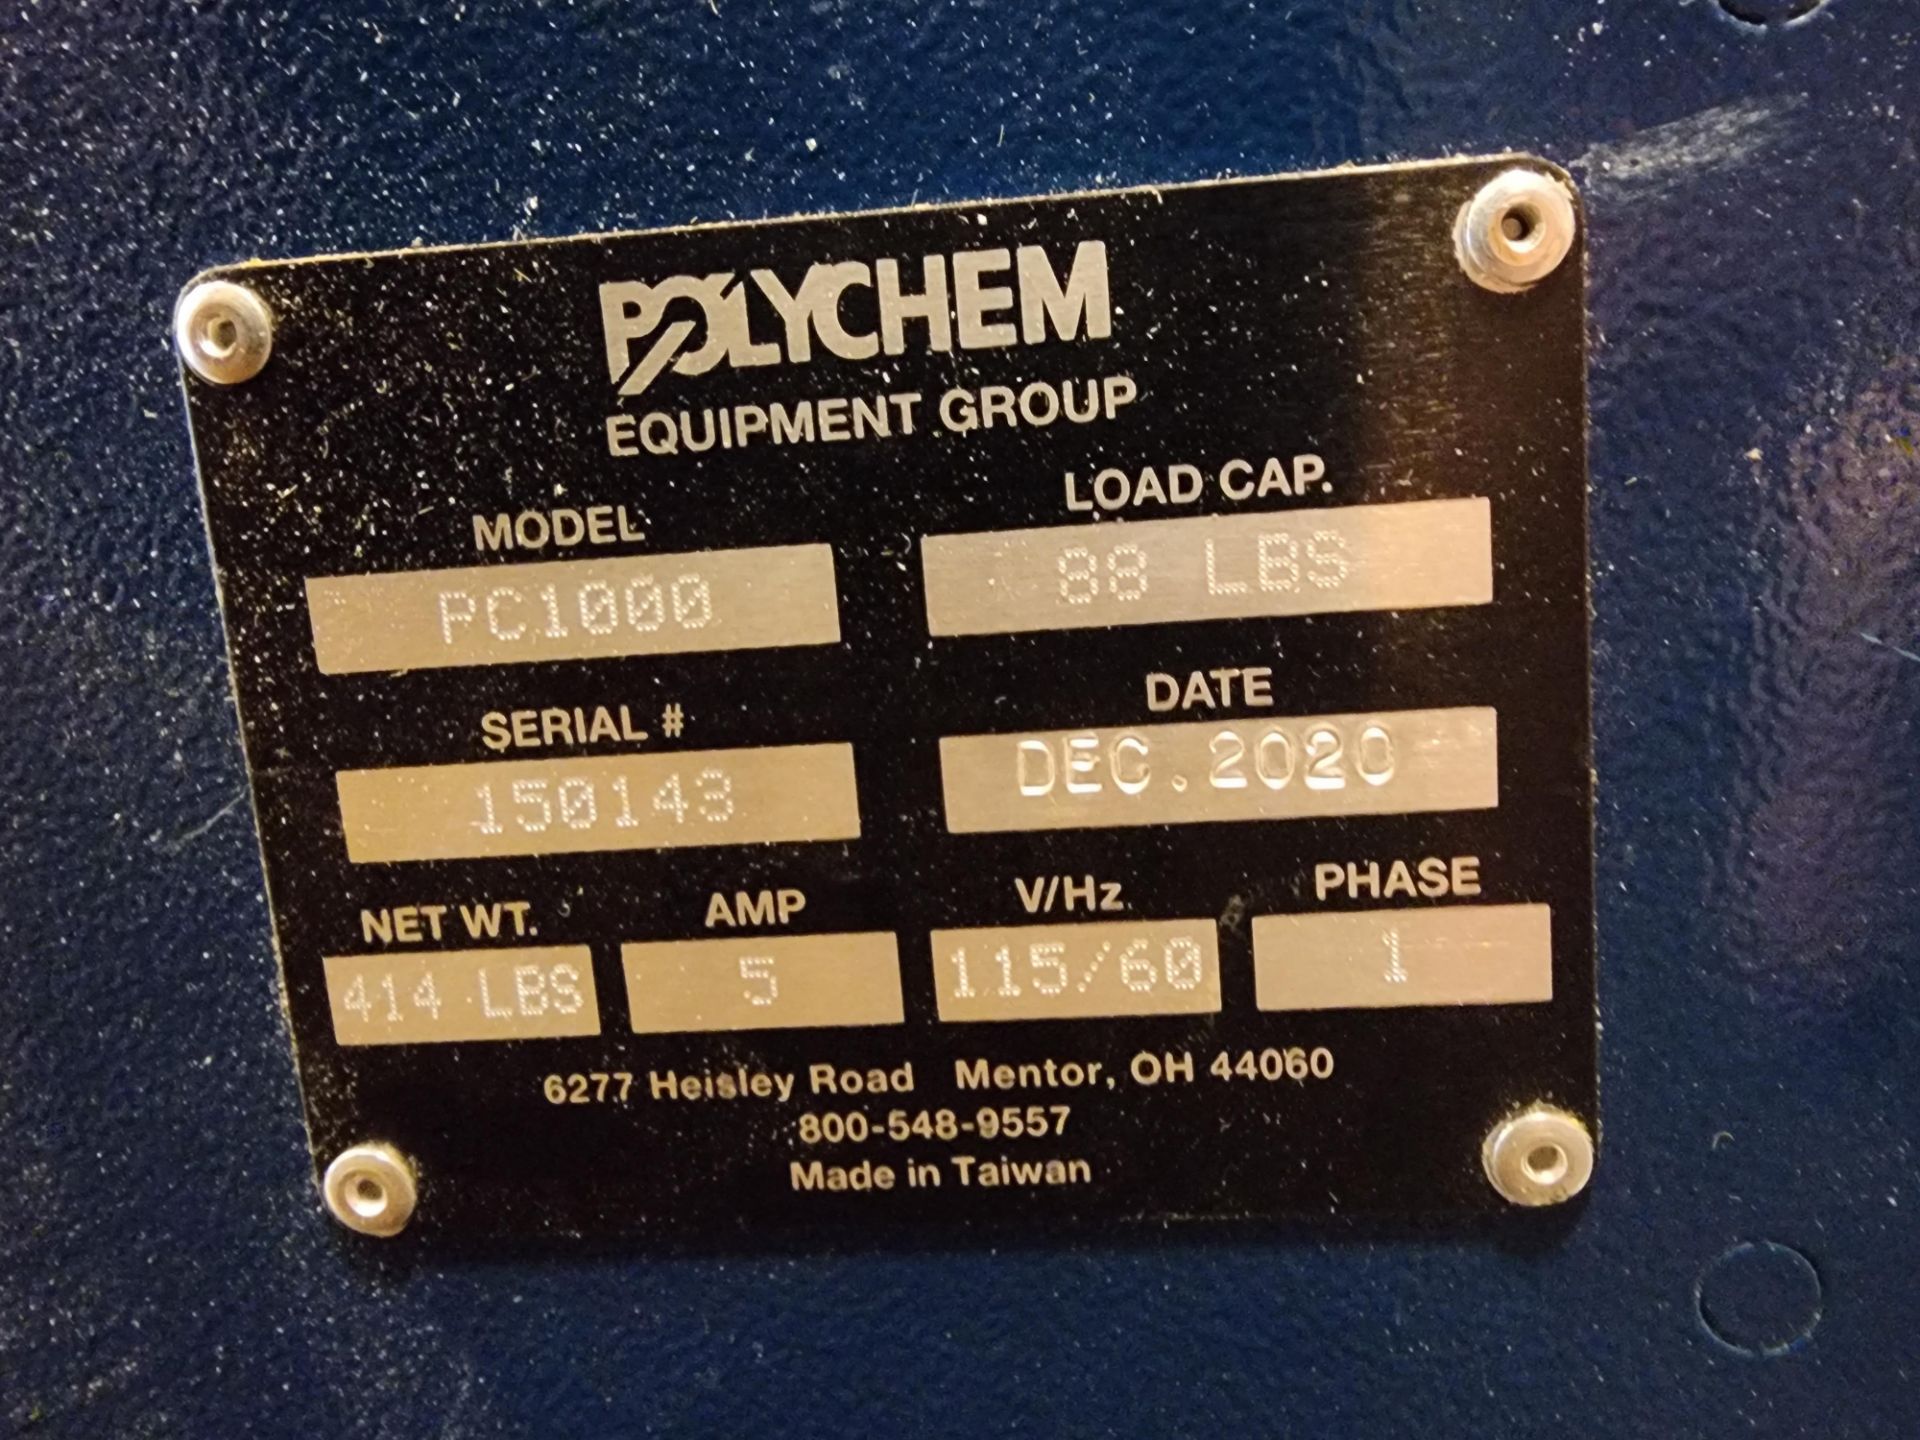 Polychem Model PC1000 Automatic Arch Strapping Machine, 88 Lb. Capacity, S/N 150143 (2020) - Image 5 of 5